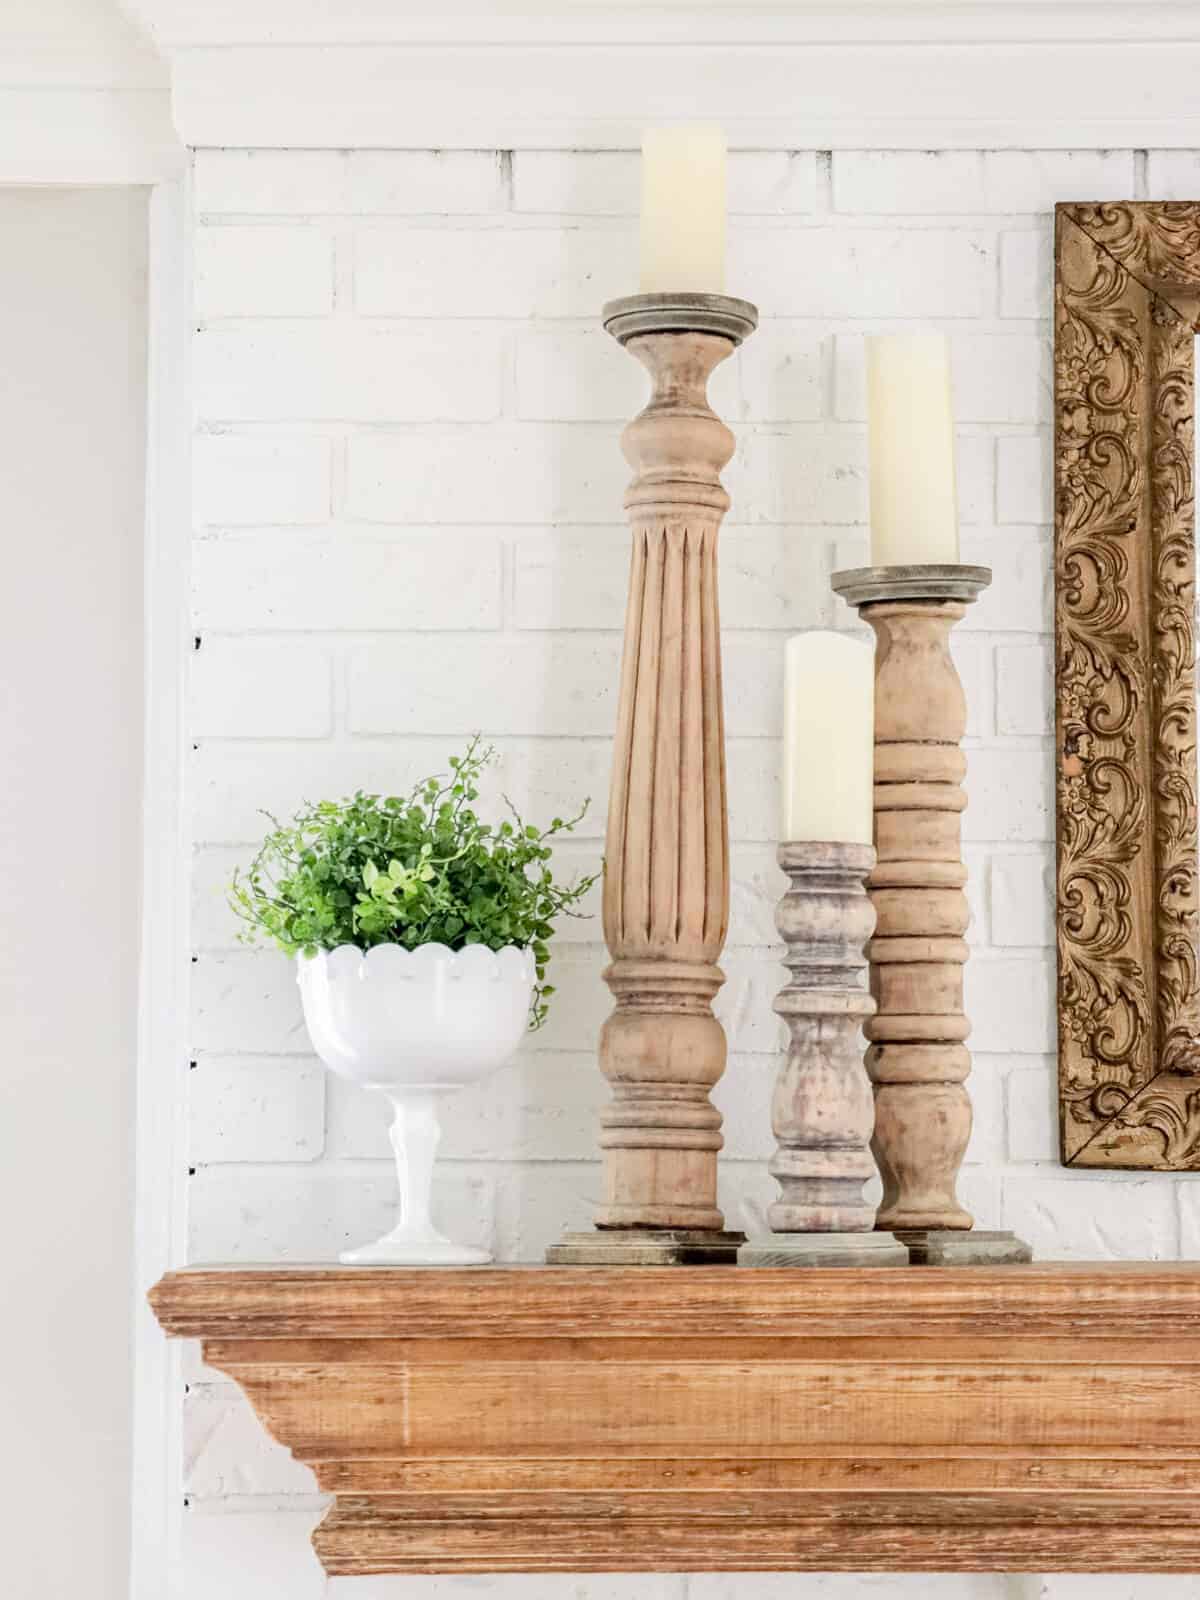 How to Make Rustic DIY Candle Holders from Old Bedposts